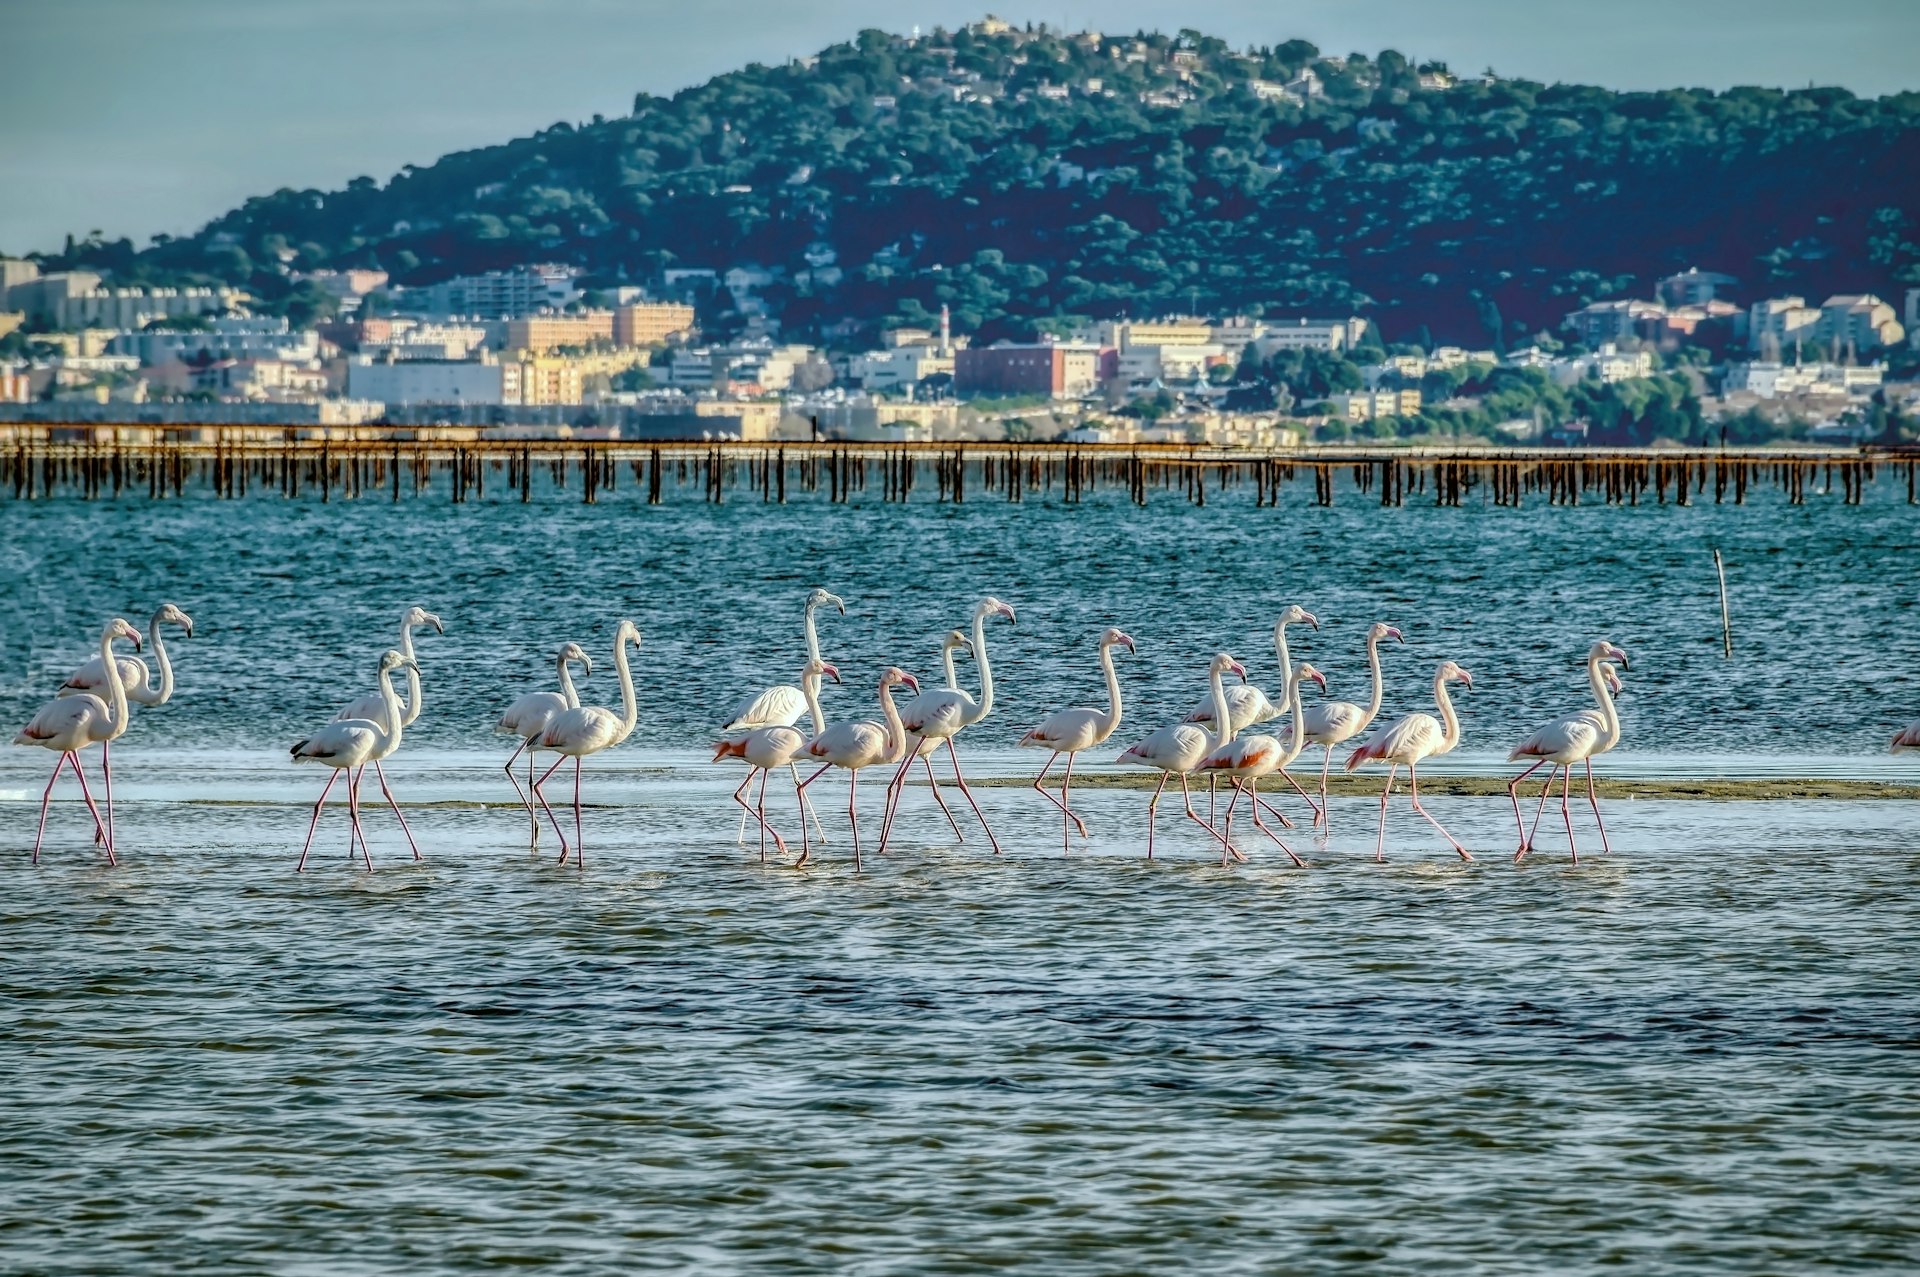 A flock of pink flamingos wade in water with a town rising on a hill in the background